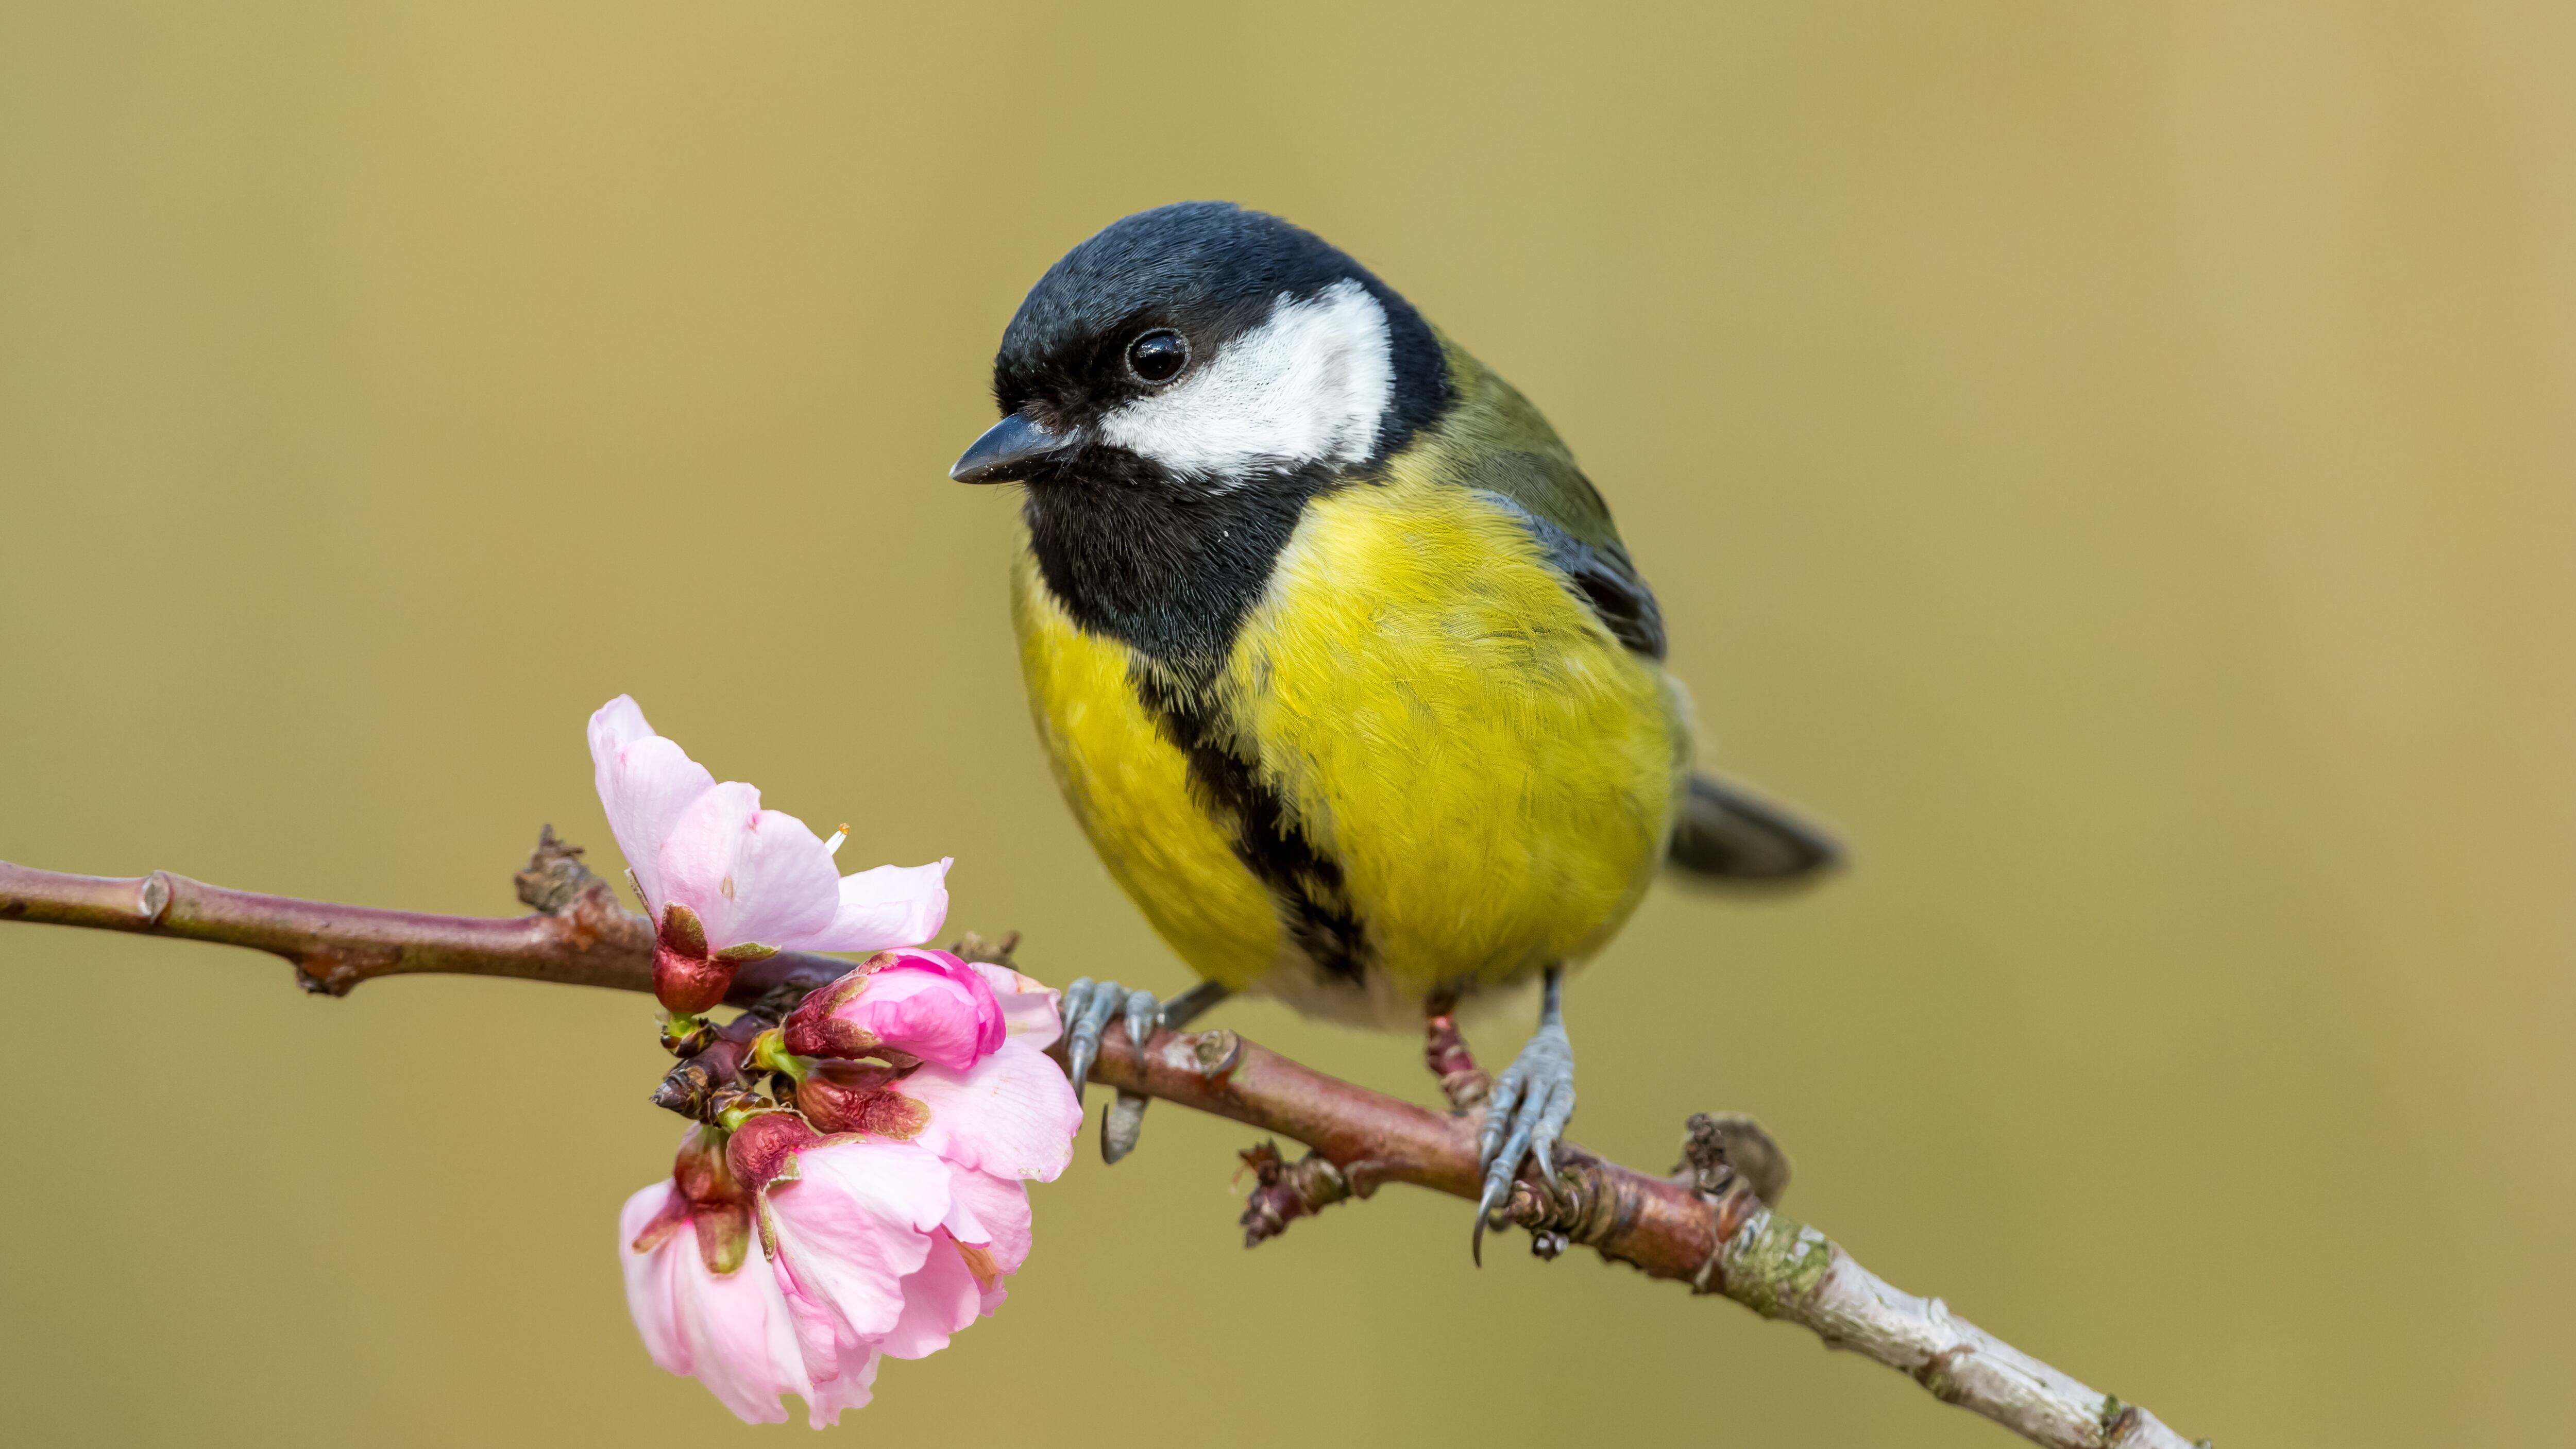 Great tit (Scientific name: Parus Major) perched on pink cherry blosson branch in Springtime.  Facing left.  Clean background.  Space for copy.  Horizontal.